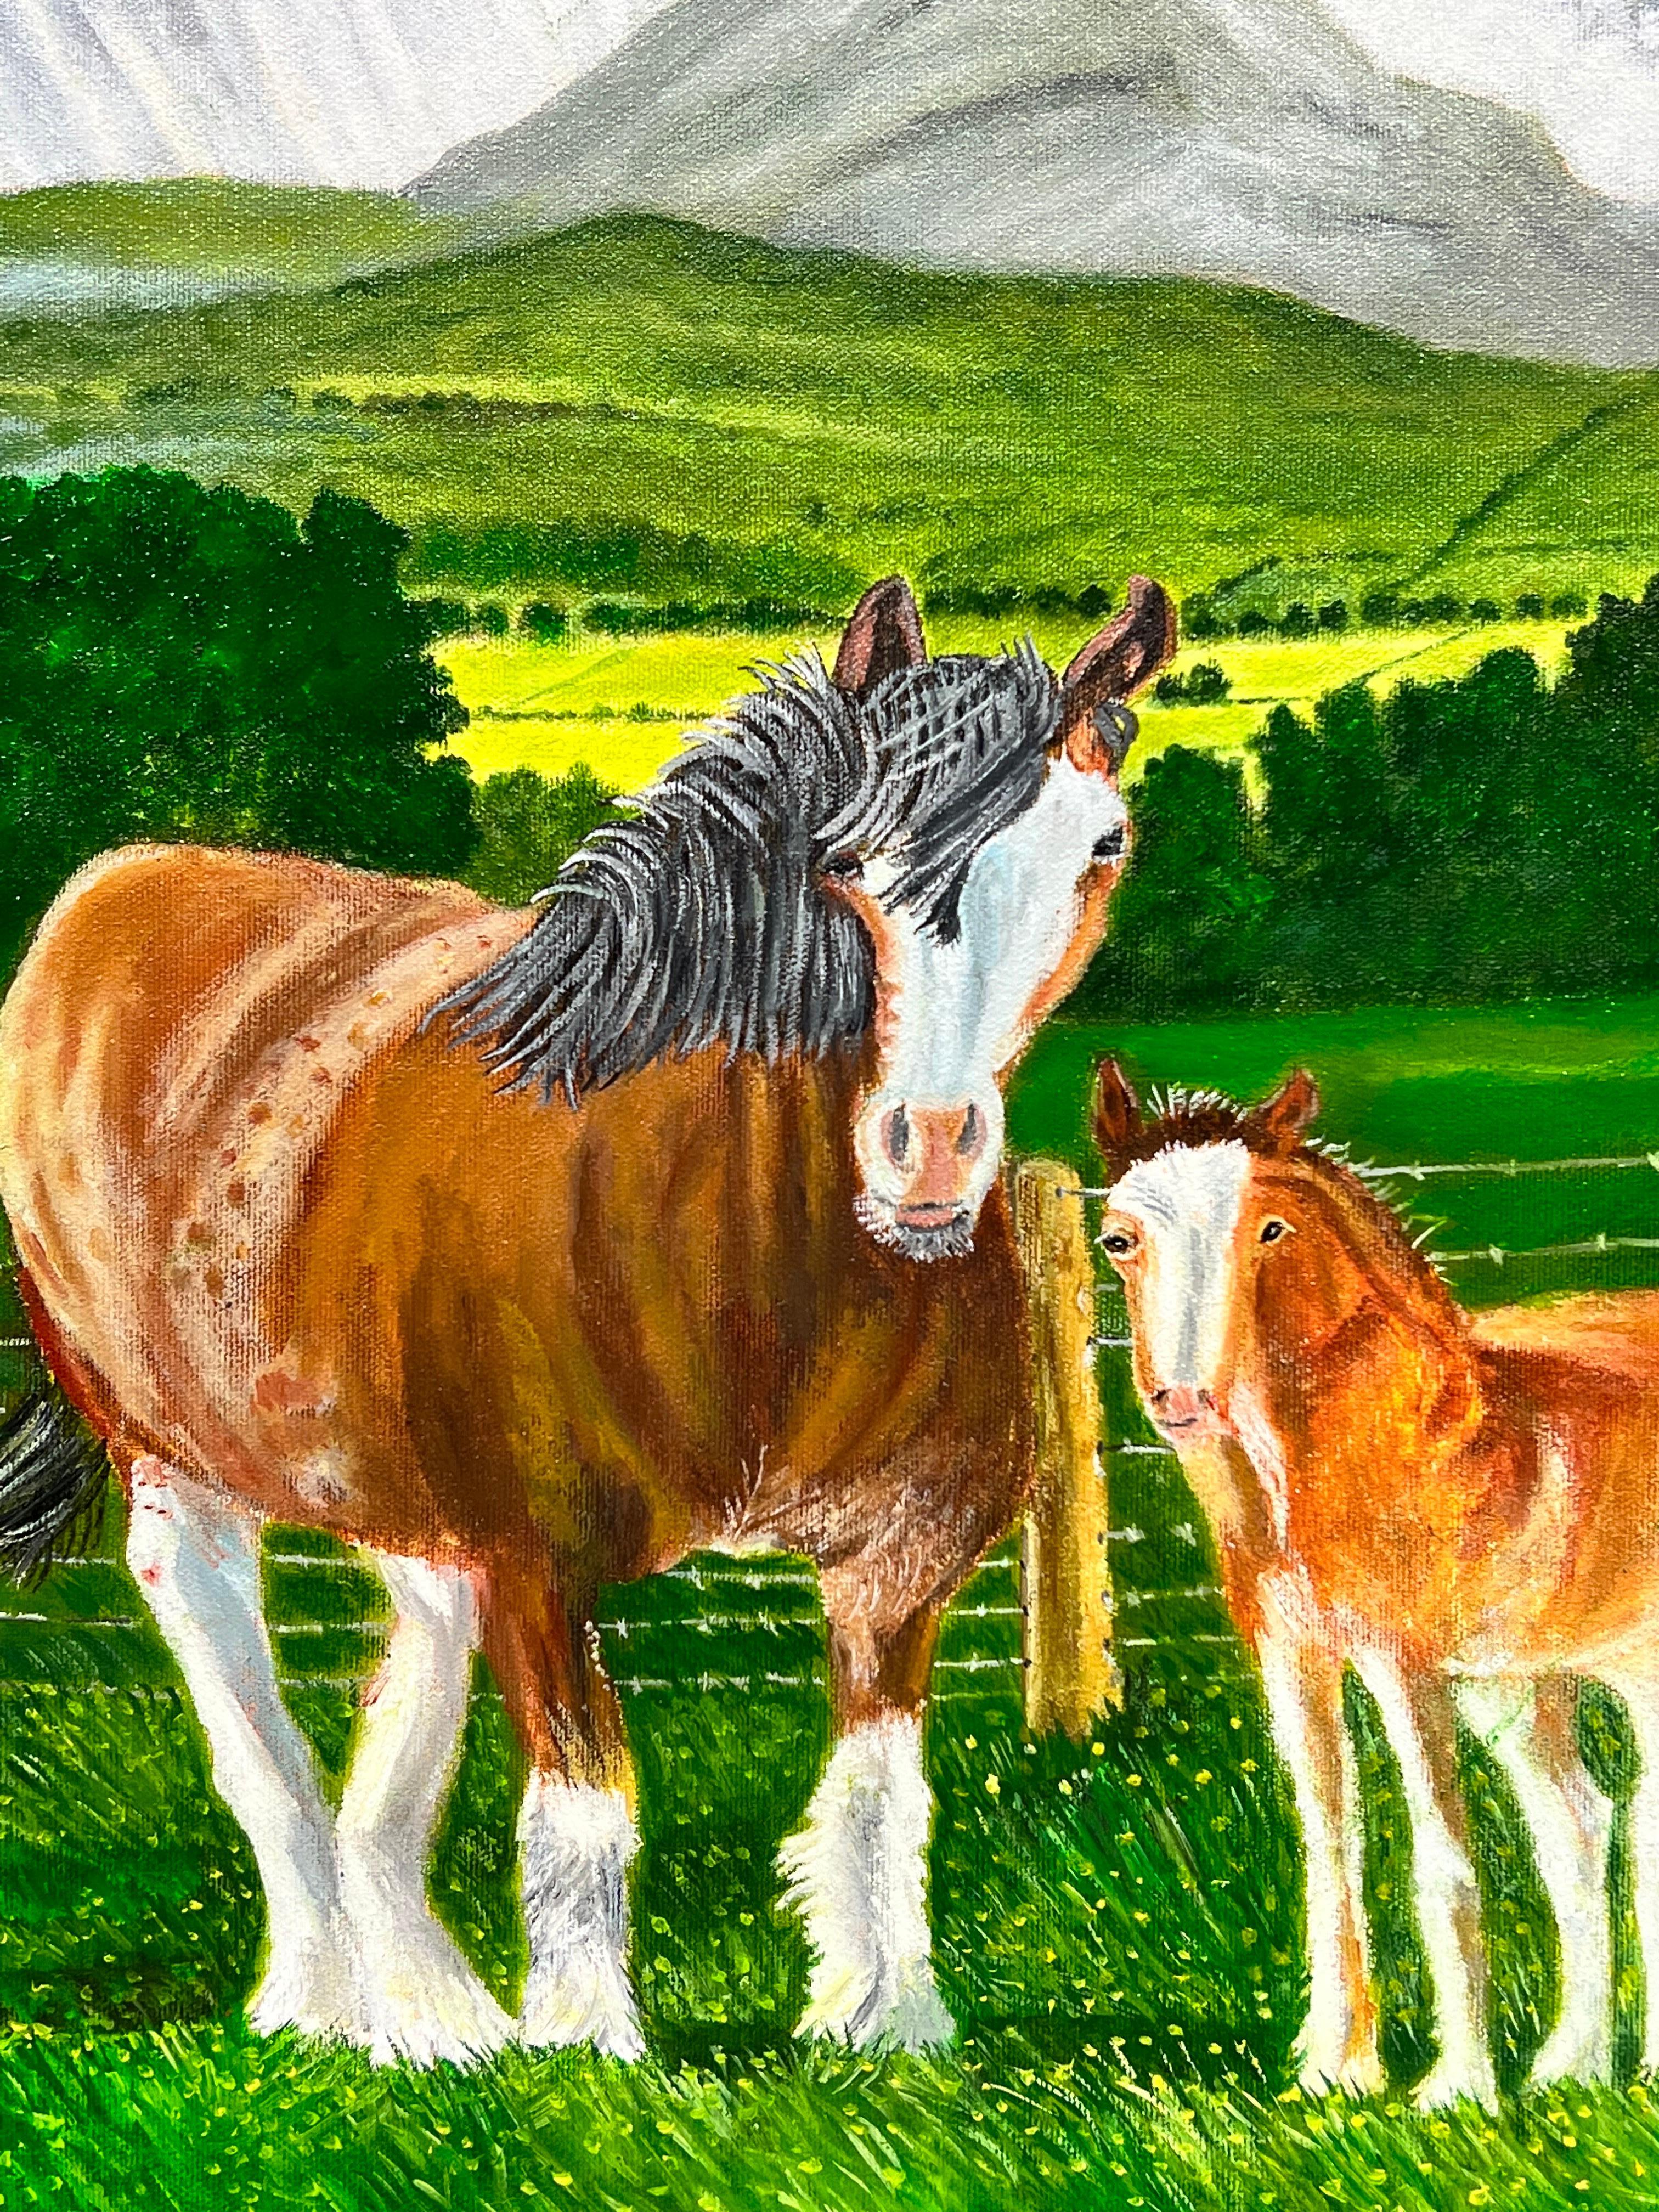 Horse and Foal
by Ben George Powell, British contemporary artist
signed
acrylic on canvas, unframed
canvas: 20 x 20 inches
provenance: private collection of this artists work, UK
The painting is in very good and presentable condition.
